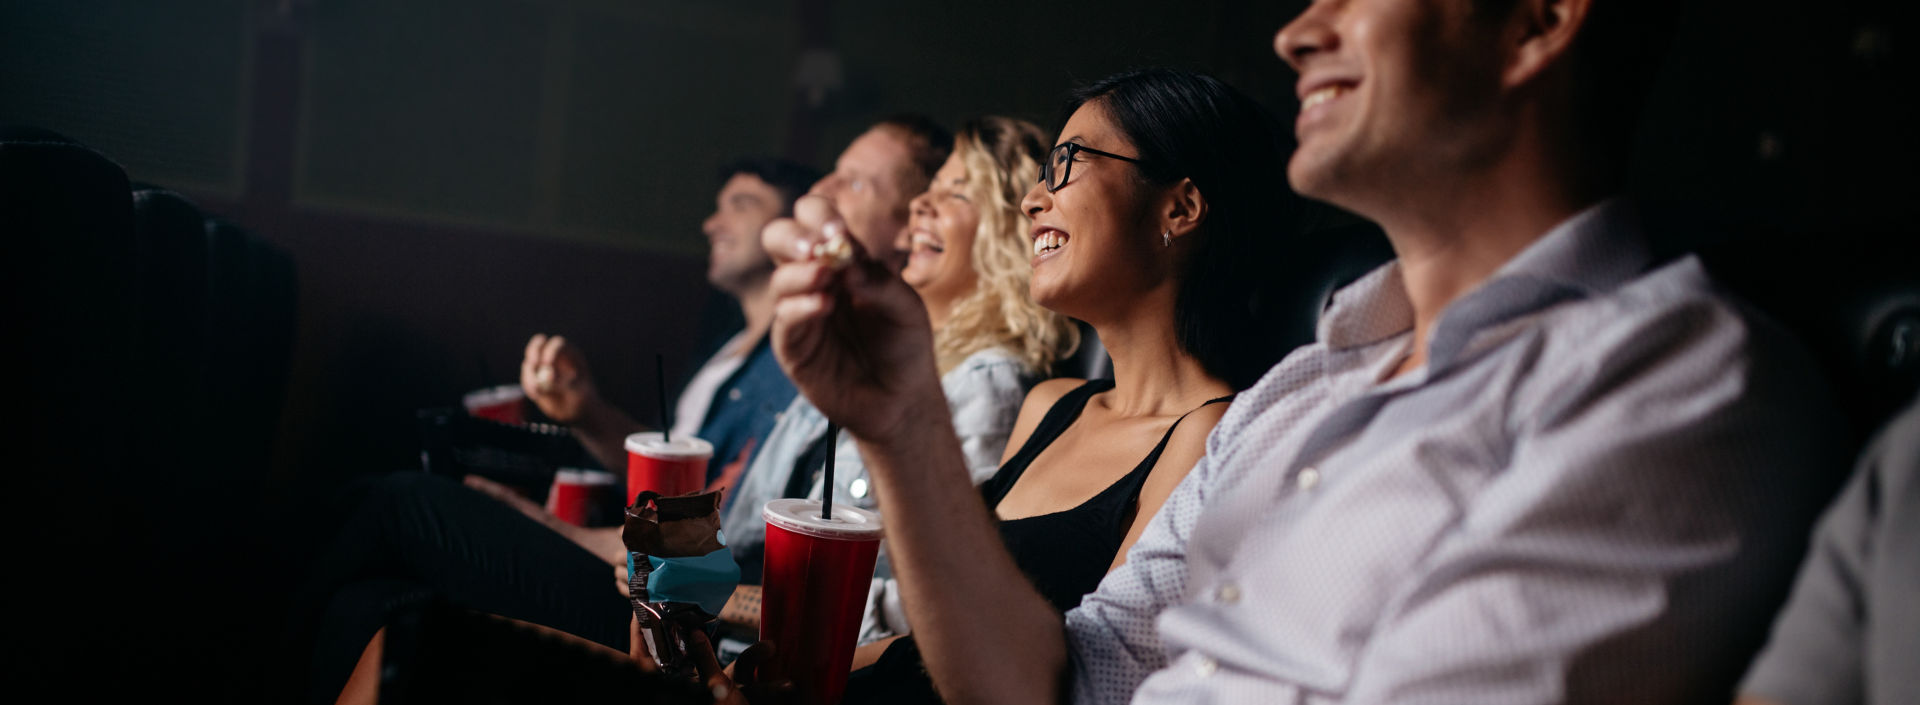 Group of people in movie theater with popcorn and drinks.